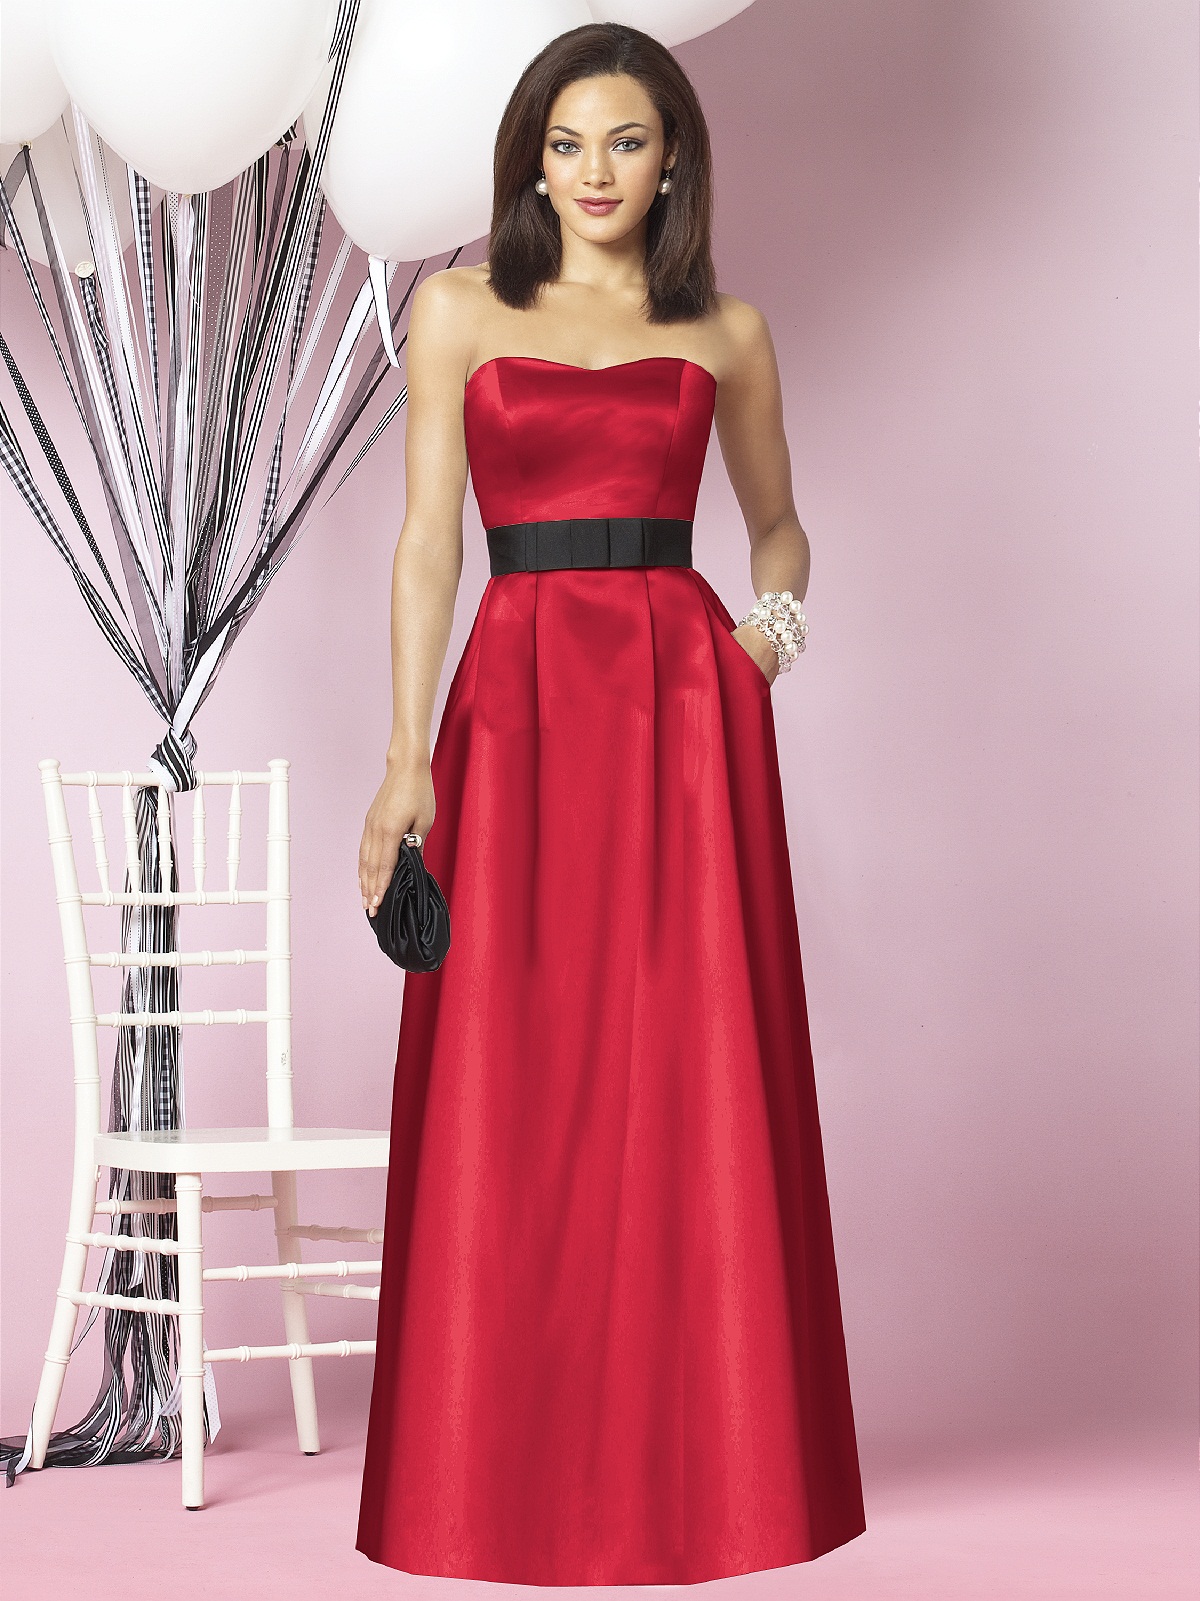 red black and white wedding bridesmaid dresses